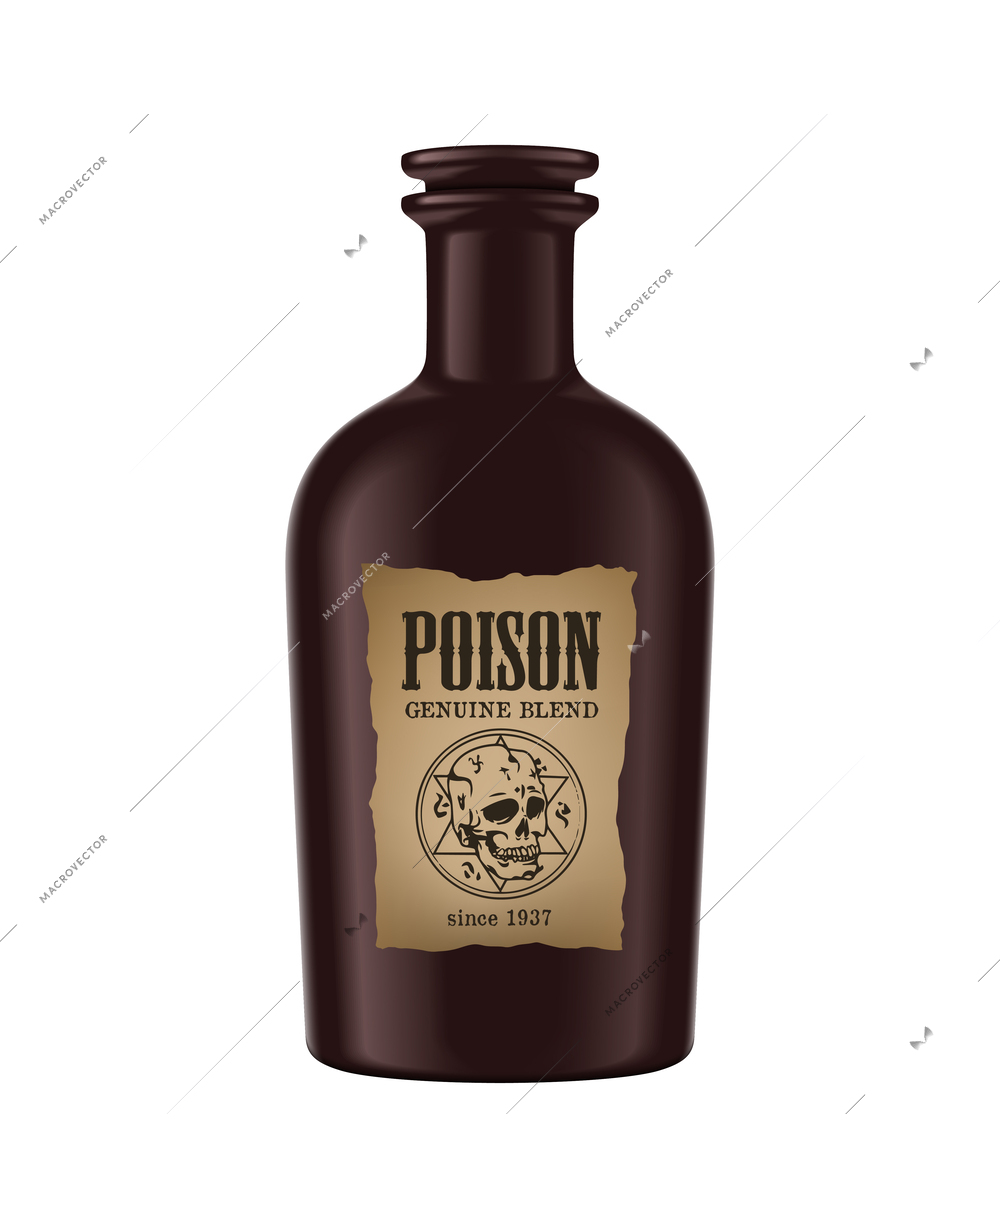 Realistic vintage bottle of poison with label vector illustration